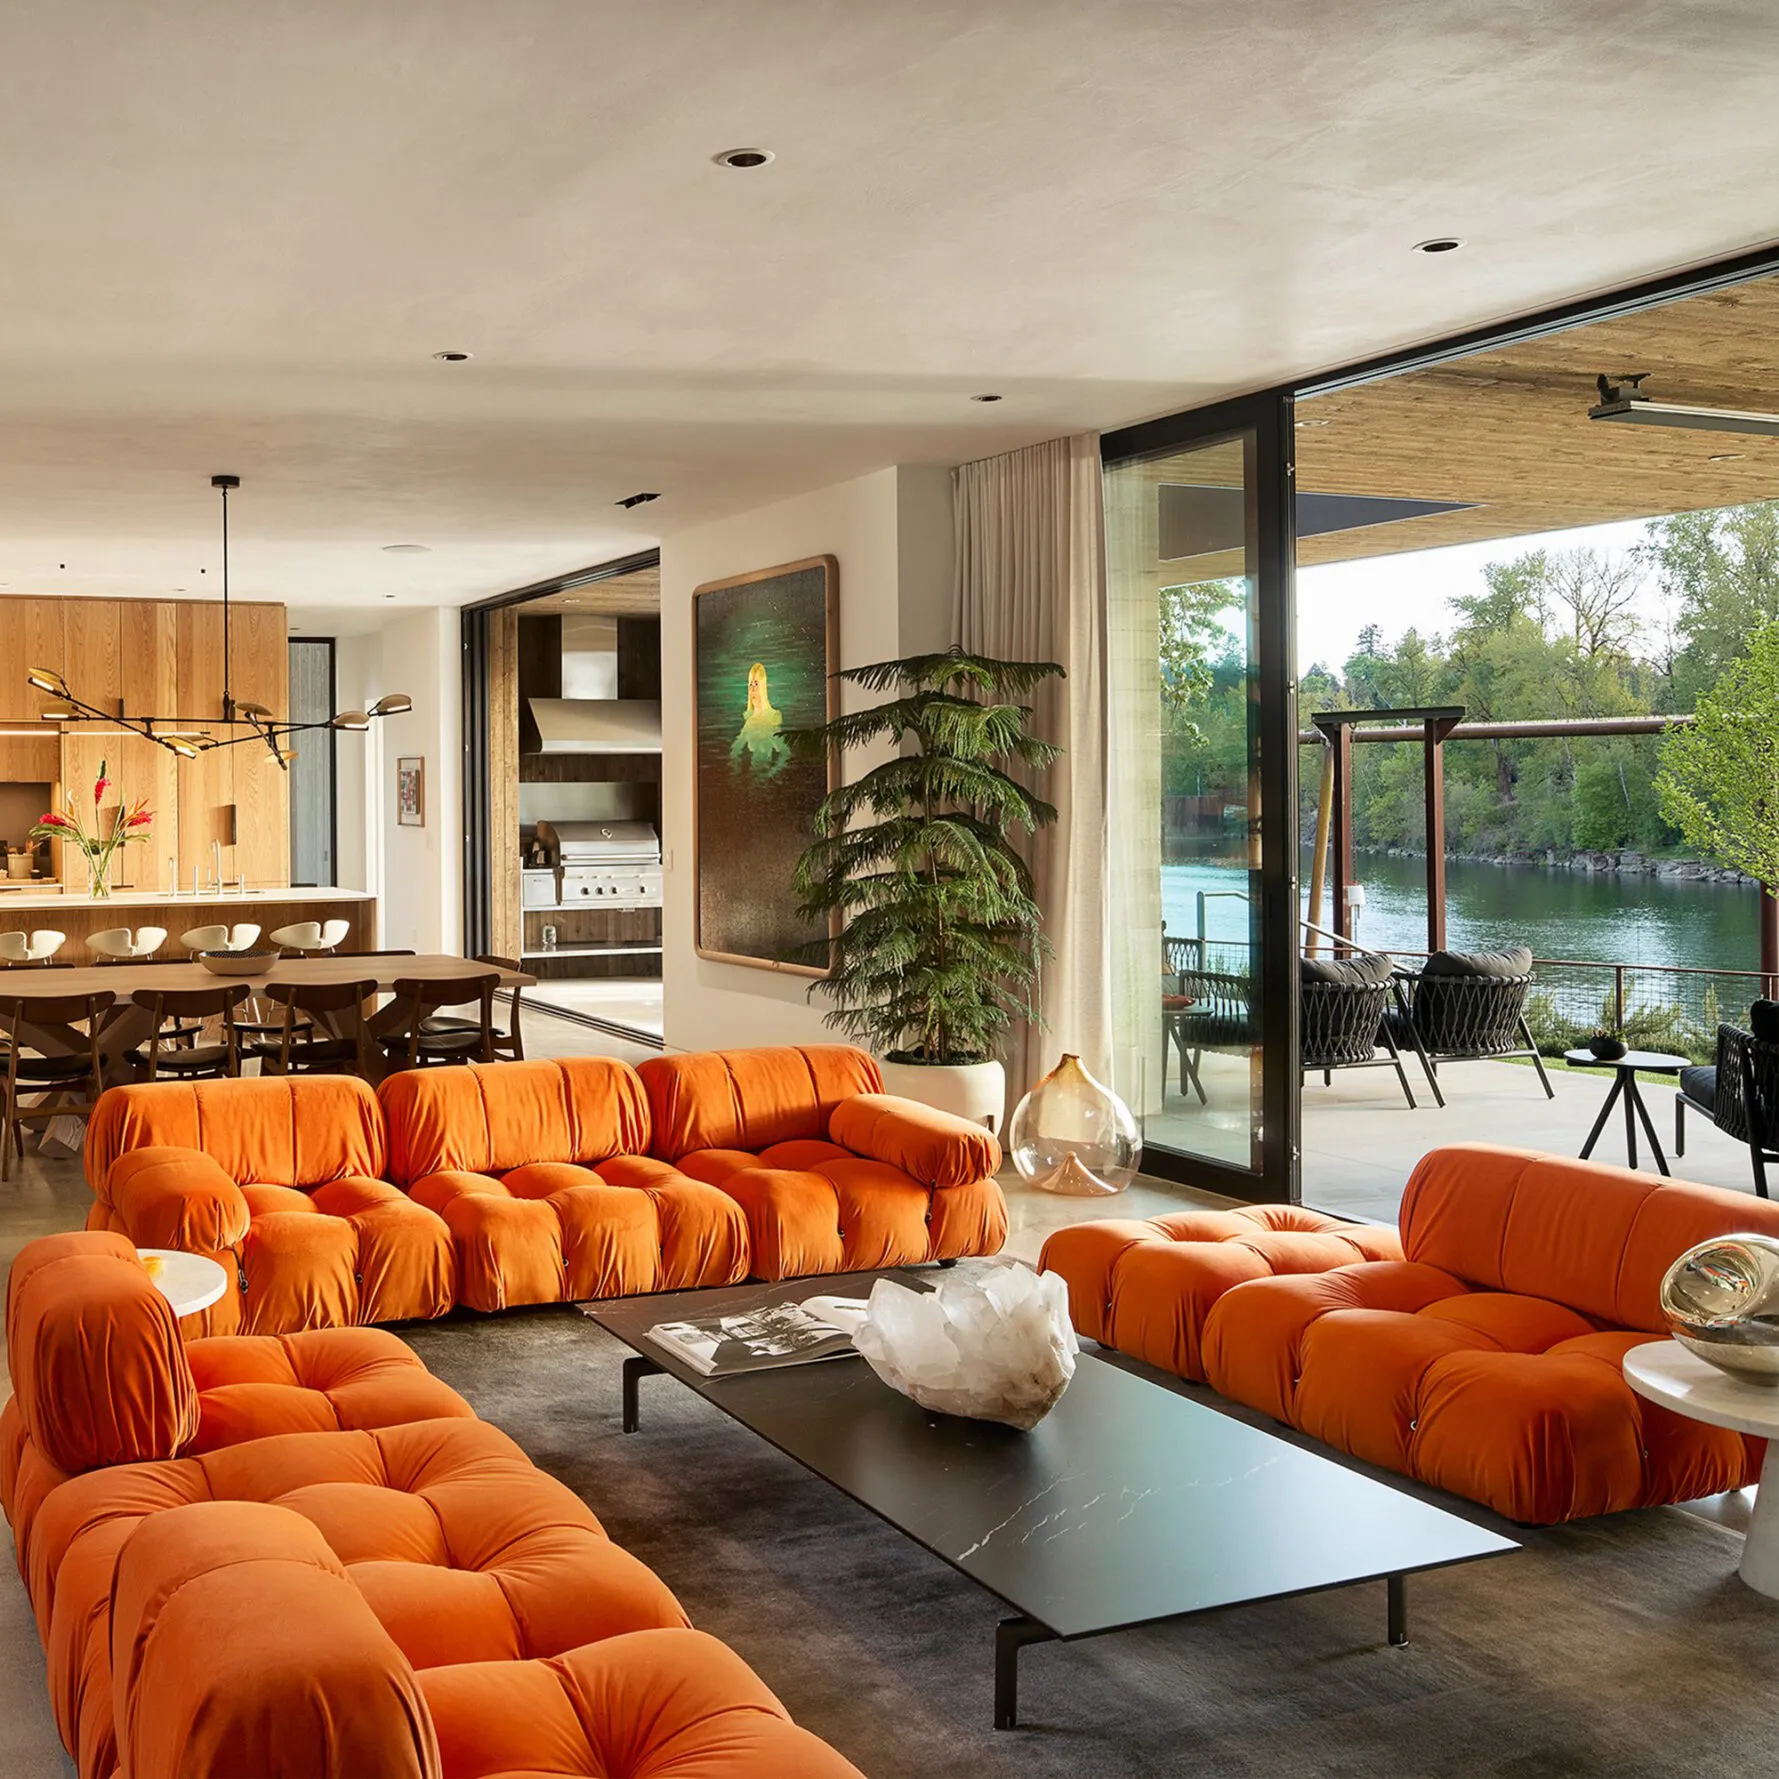 Timelessly chic, mid-century modern living rooms retain their enduring popularity.</p>
<p>Defined by their sleek lines, minimalist hues, and a fusion of organic and geometric elements, the mid-century modern aesthetic continues to resonate with homeowners, architects, and designers.</p>
<p>Whether you aspire to craft a refined mid-century interior or simply incorporate iconic pieces into your living space, I've got you covered.</p>
<p>In this post, you will learn 20 inspiring ideas to seamlessly infuse your home with the timeless allure of mid-century modern design.